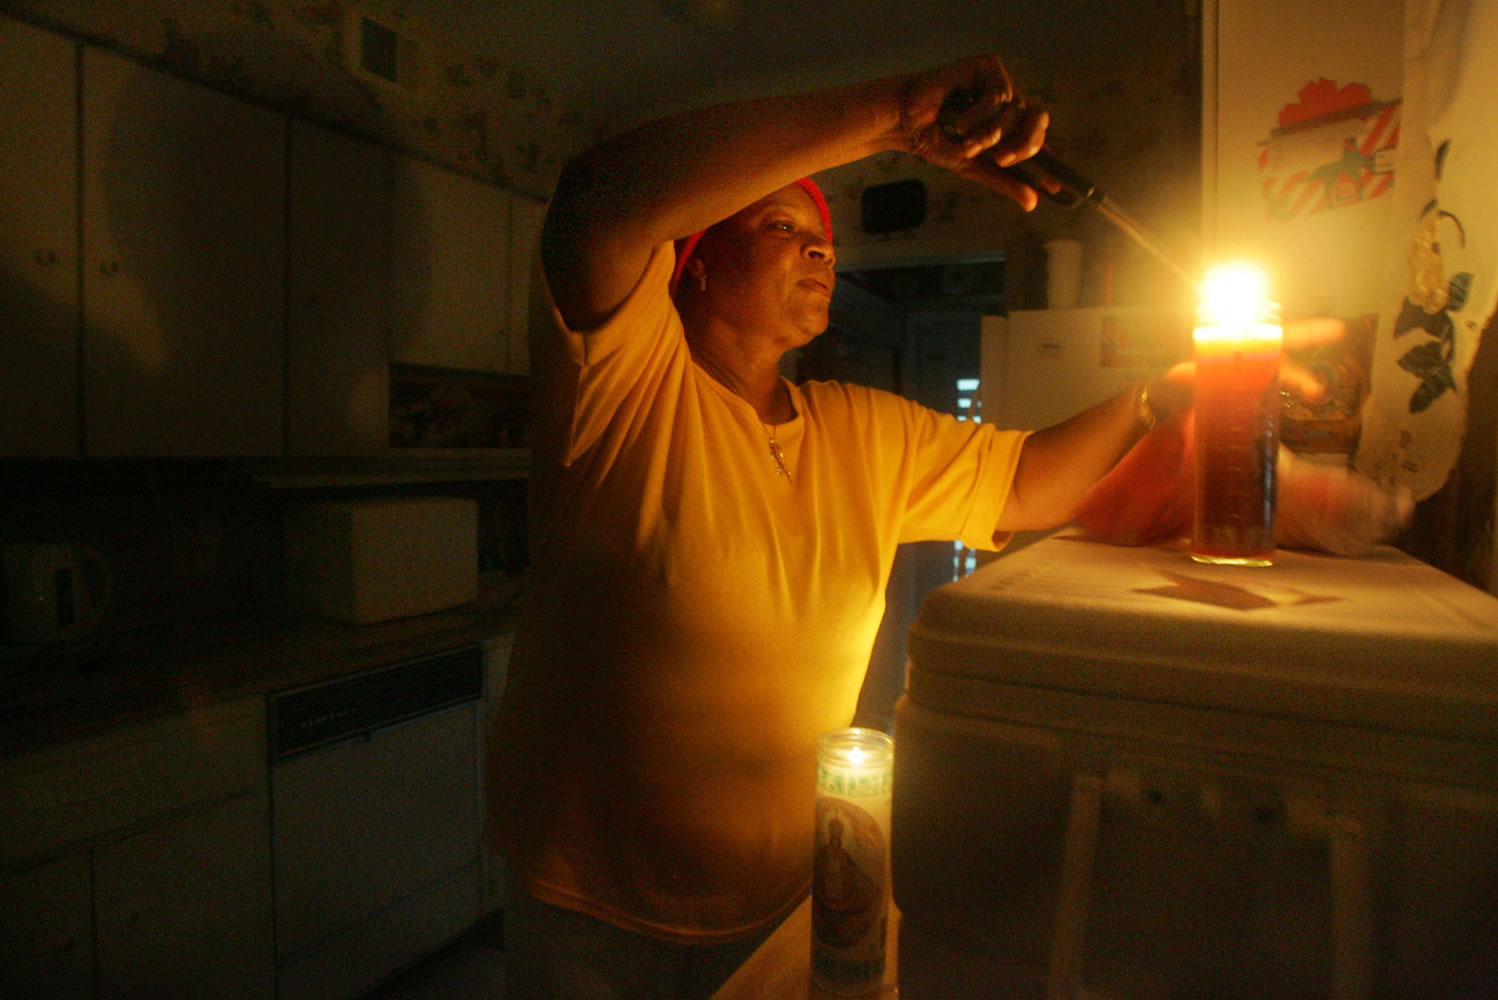 Minet Watson lights a candle in her home in Miami Shores, Fla., after Hurricane Katrina knocked out power in 2005.